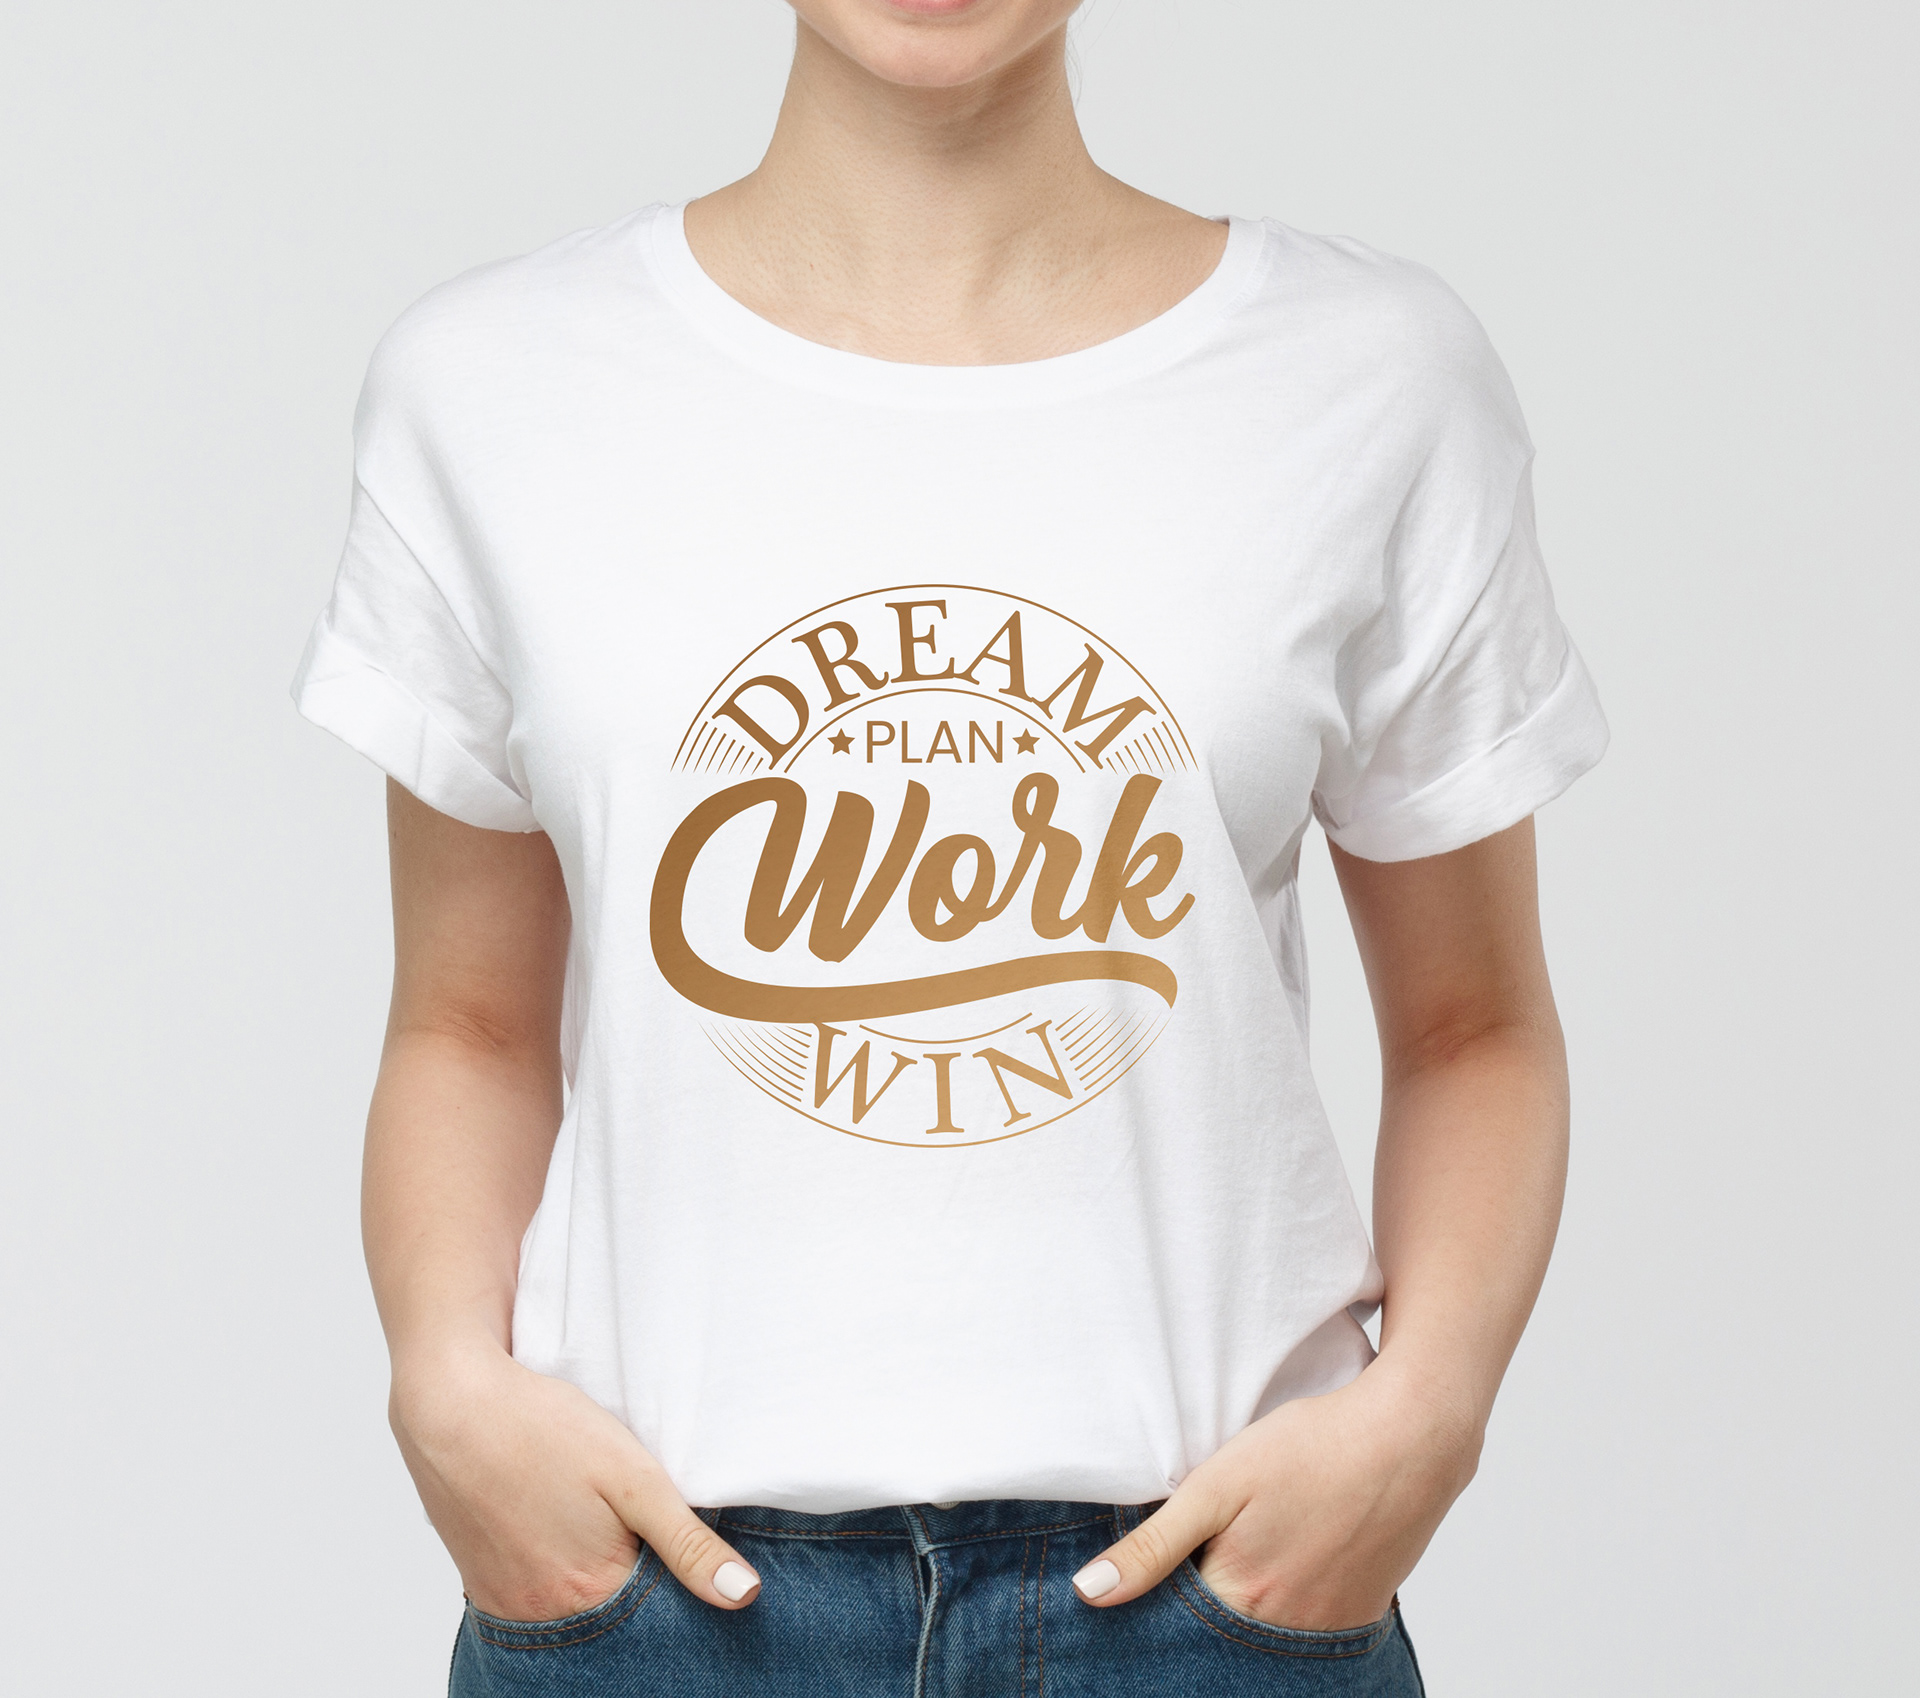 Free T-Shirt Mock-up and Design